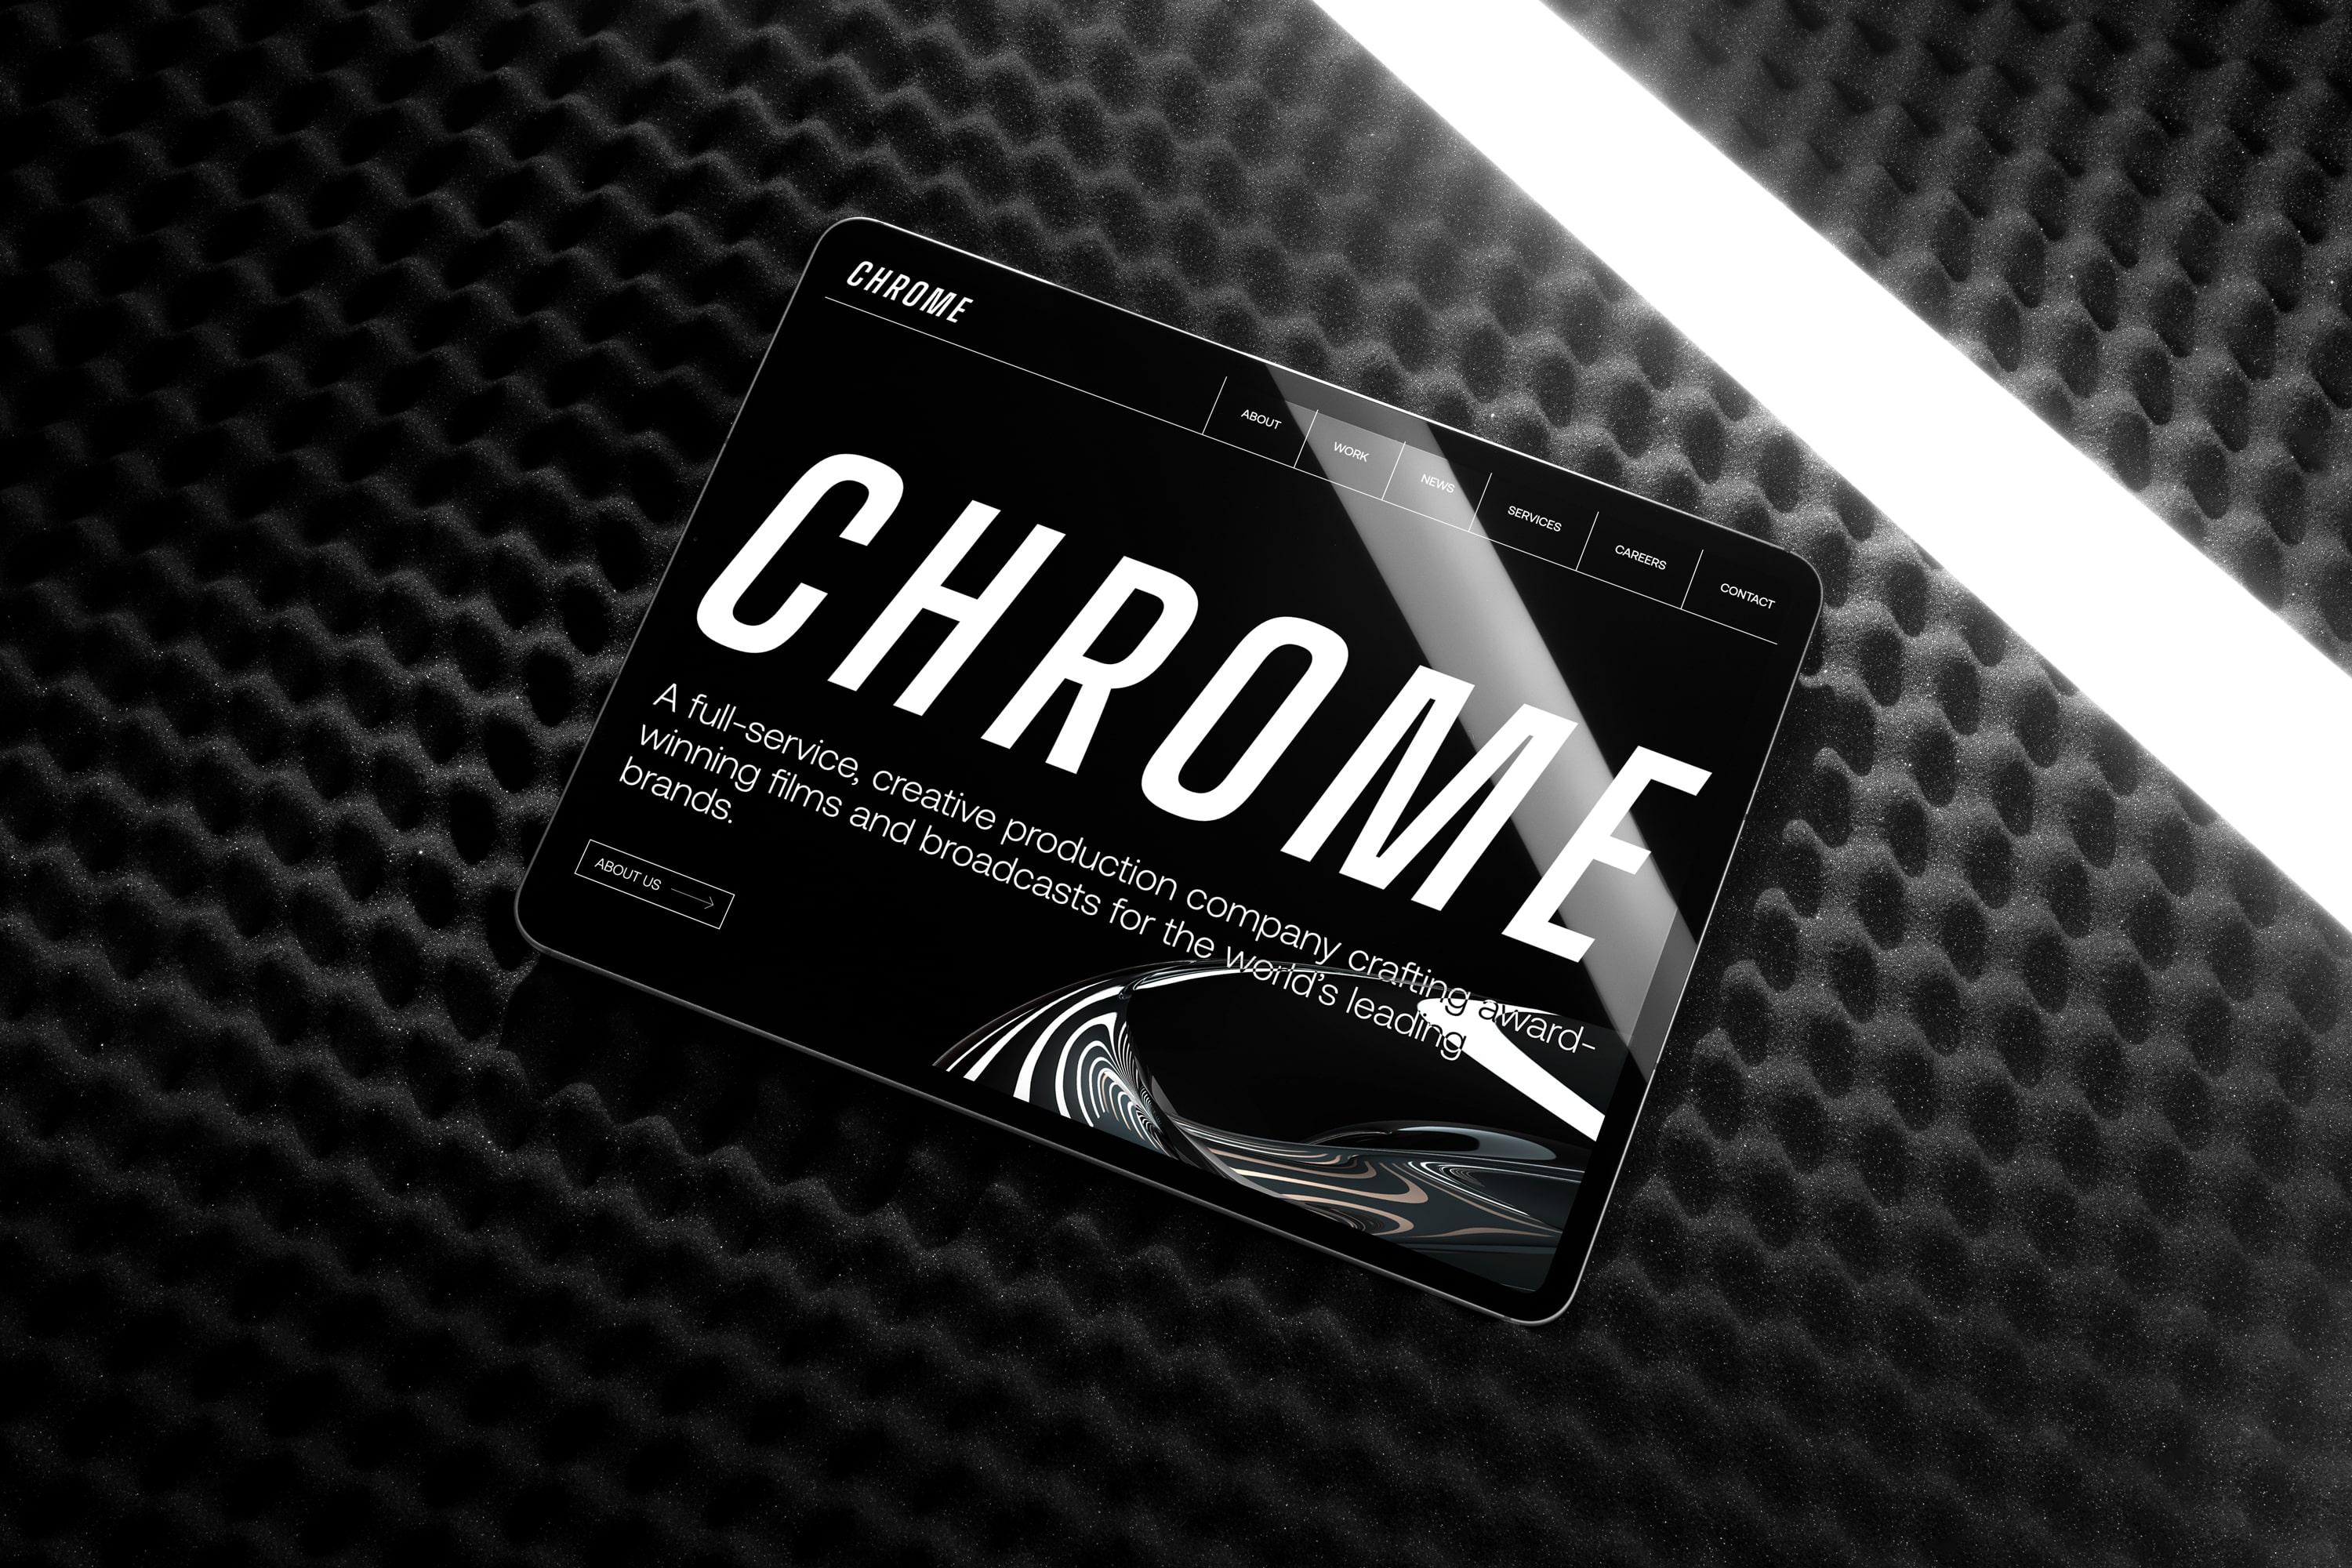 Chrome Productions – Production Agency Rebranding and Website